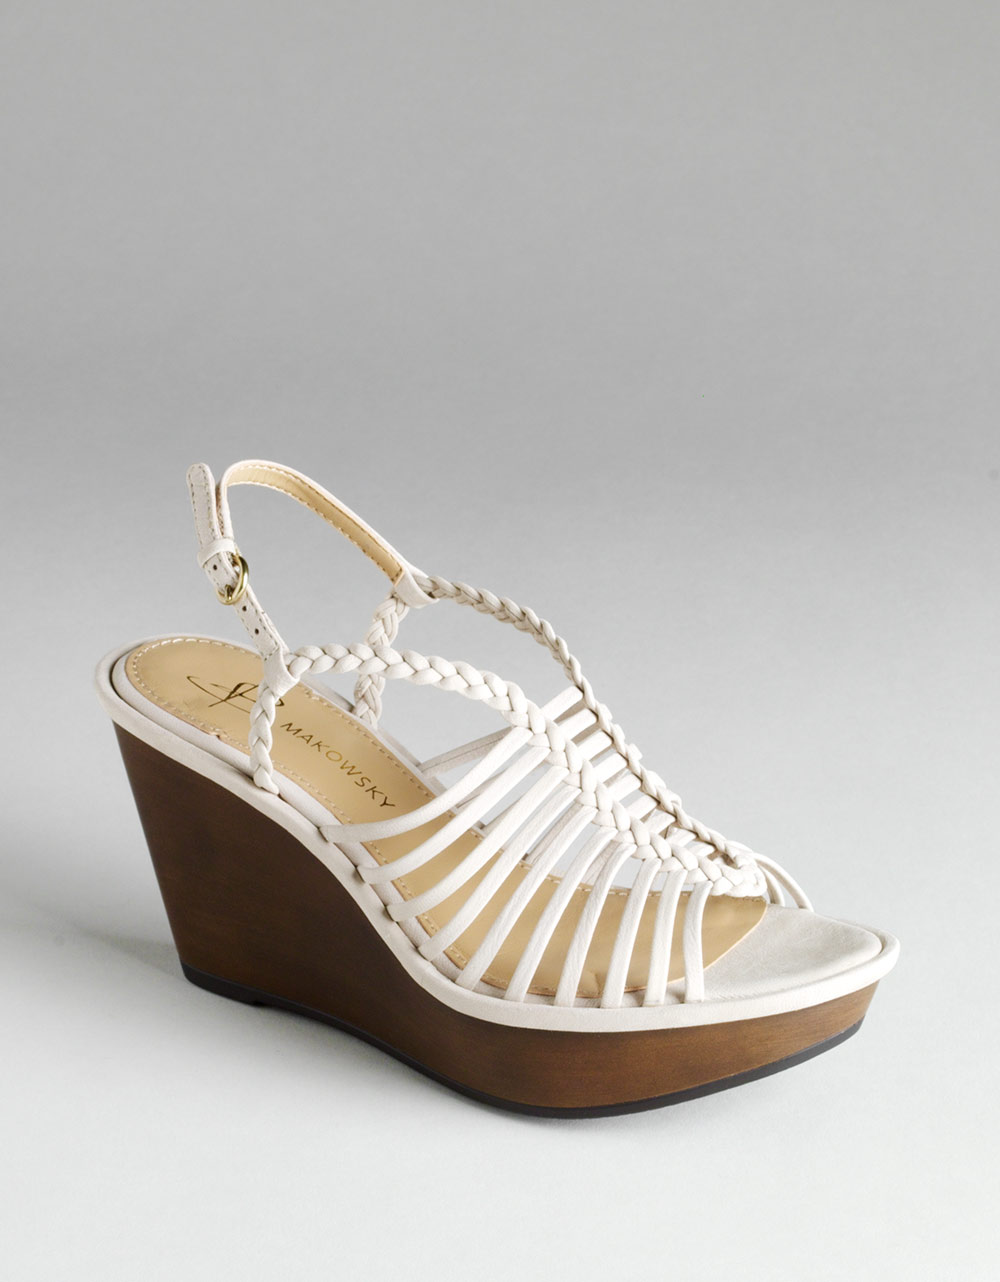 B. Makowsky Willow Platform Wedge Sandals in White (beige leather) | Lyst